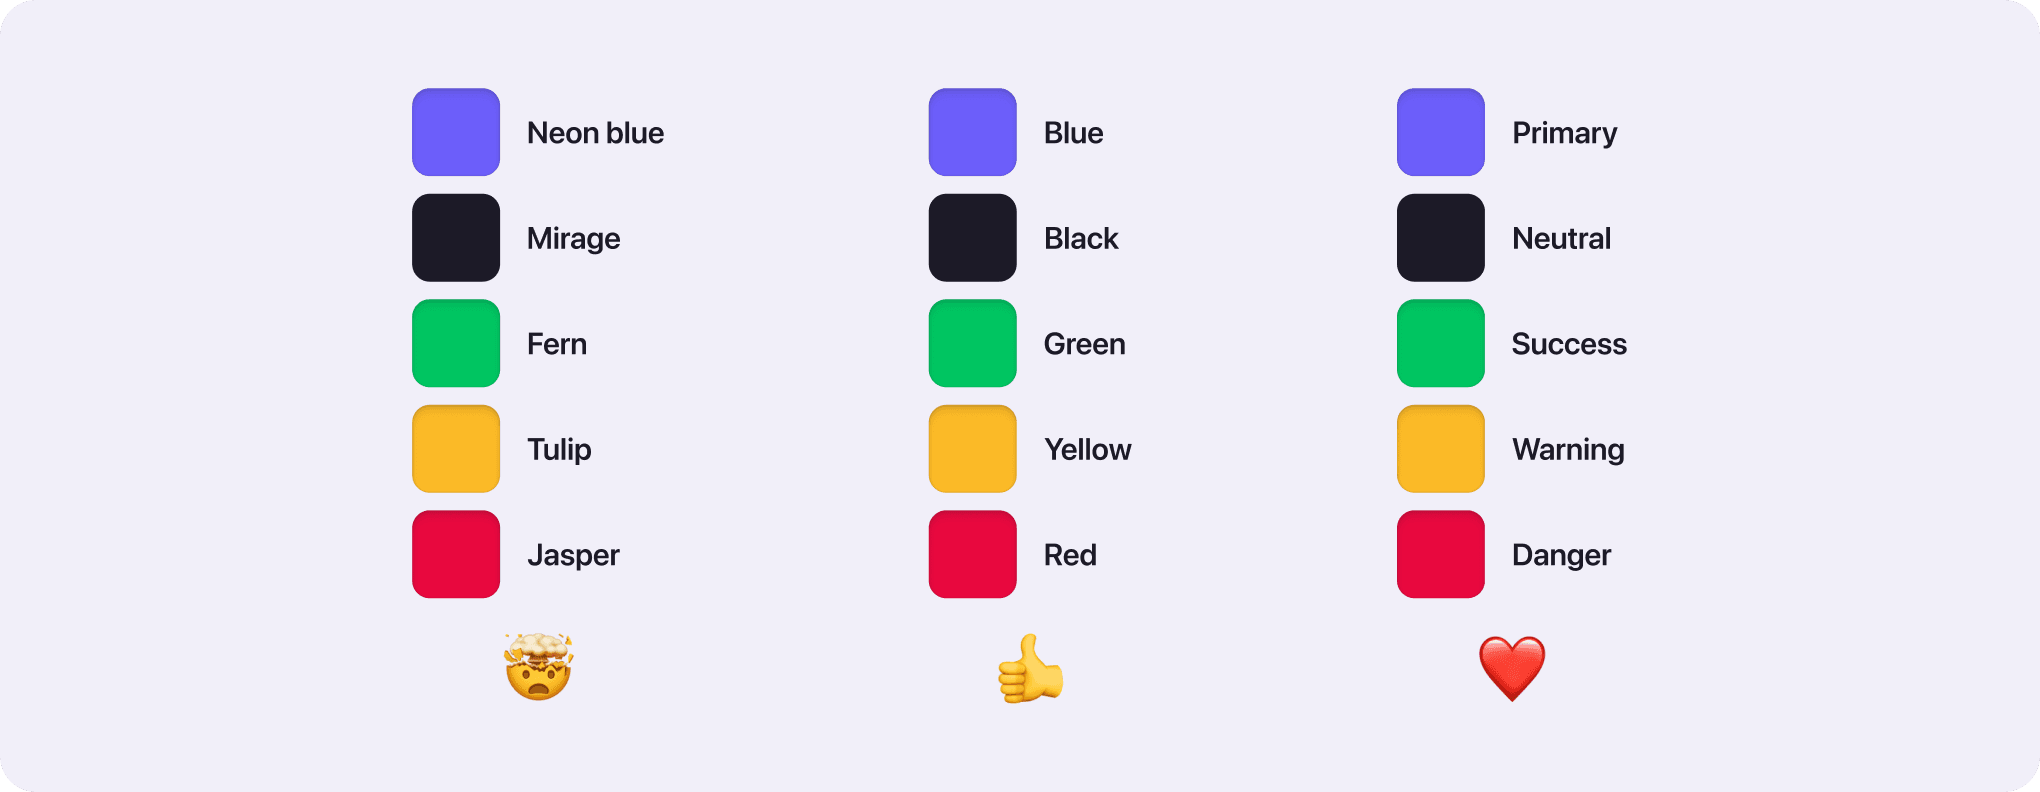 Abstract vs. Real vs. Function color naming conventions